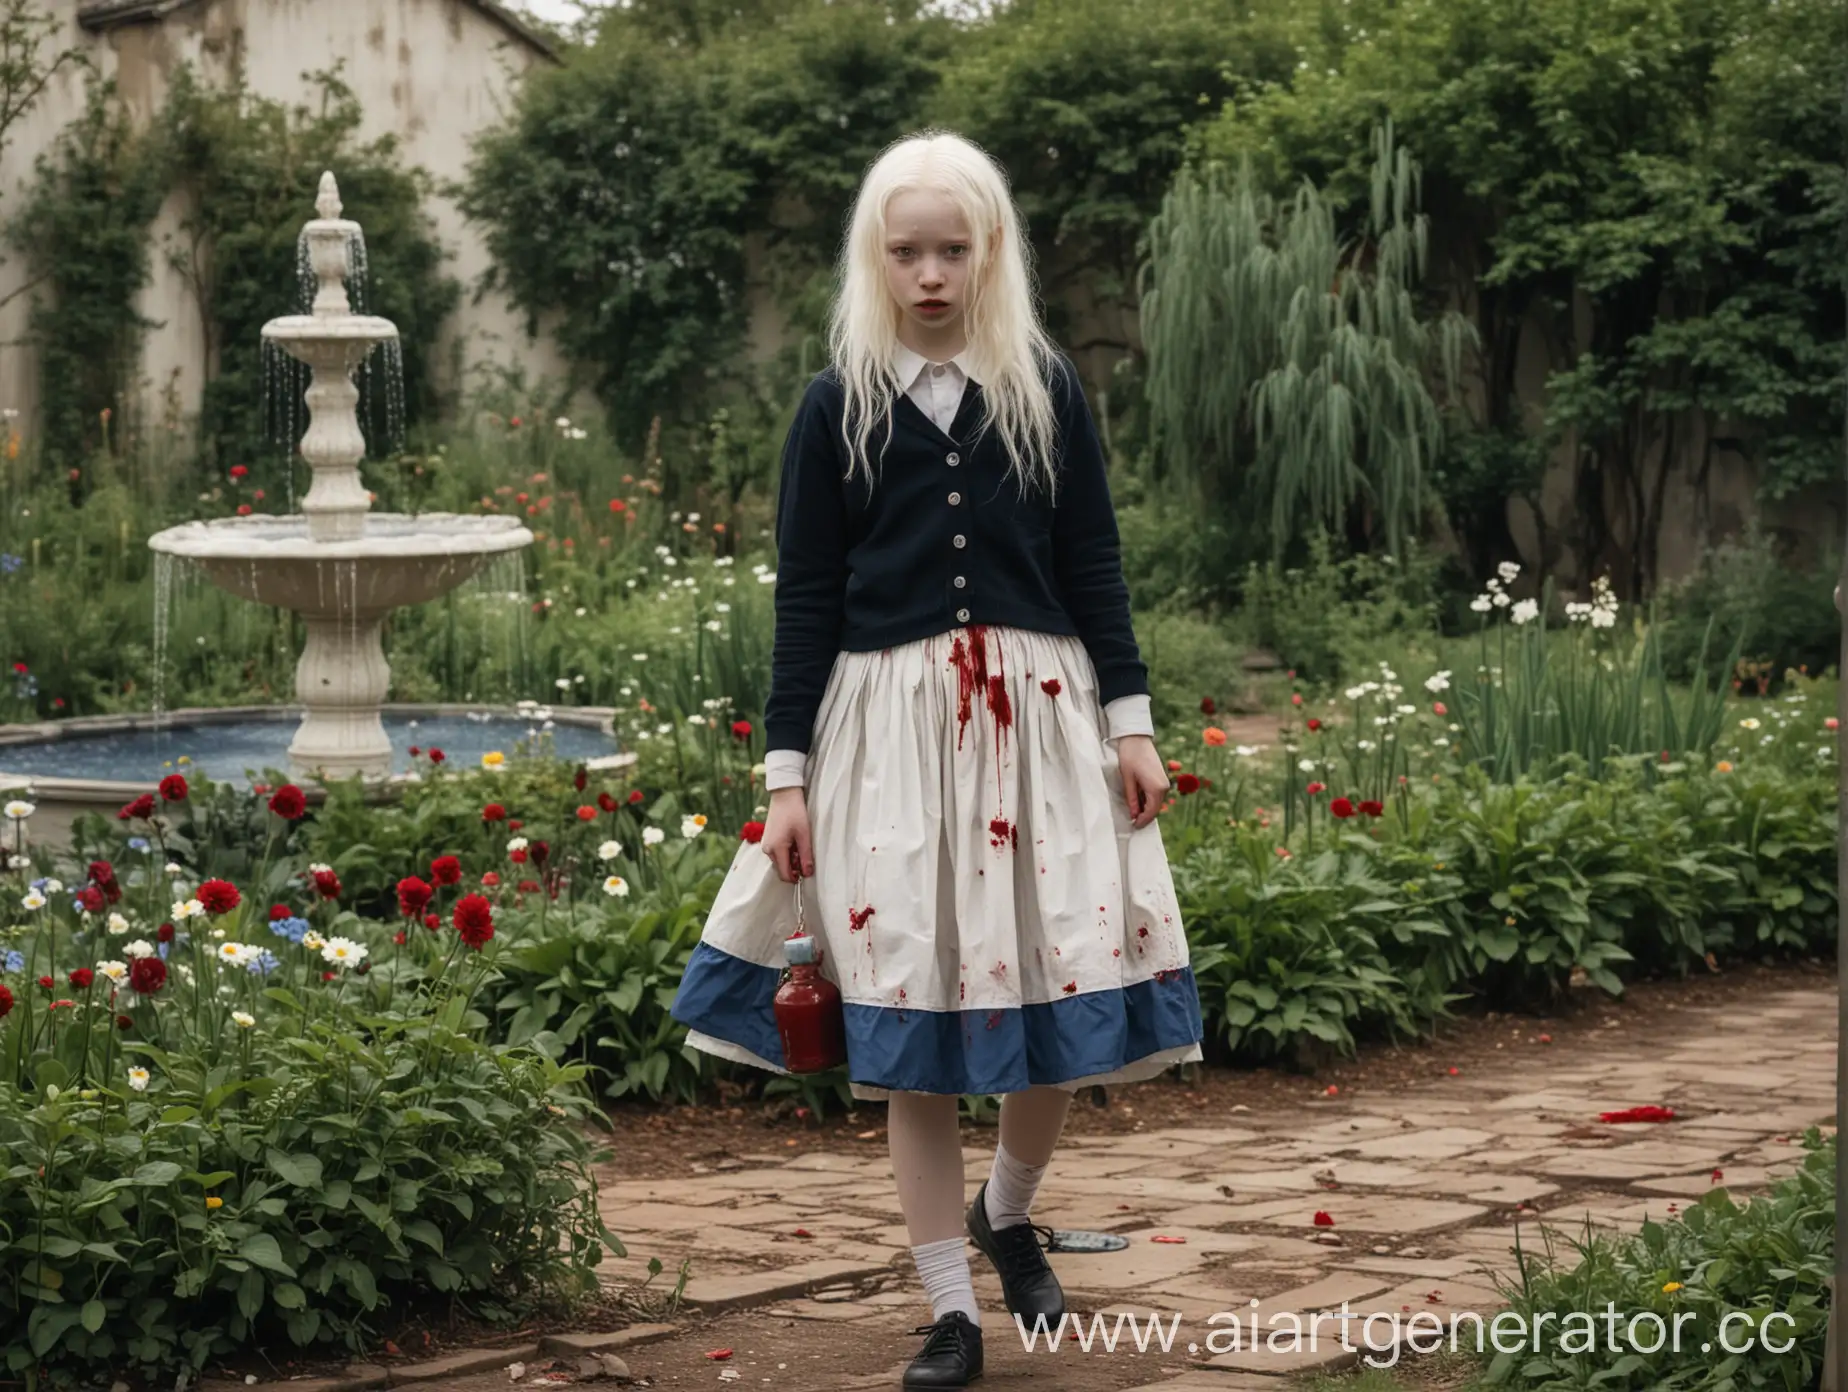 Albino-Teen-Girl-Strolling-Garden-with-Blood-Bottle-and-Fountain